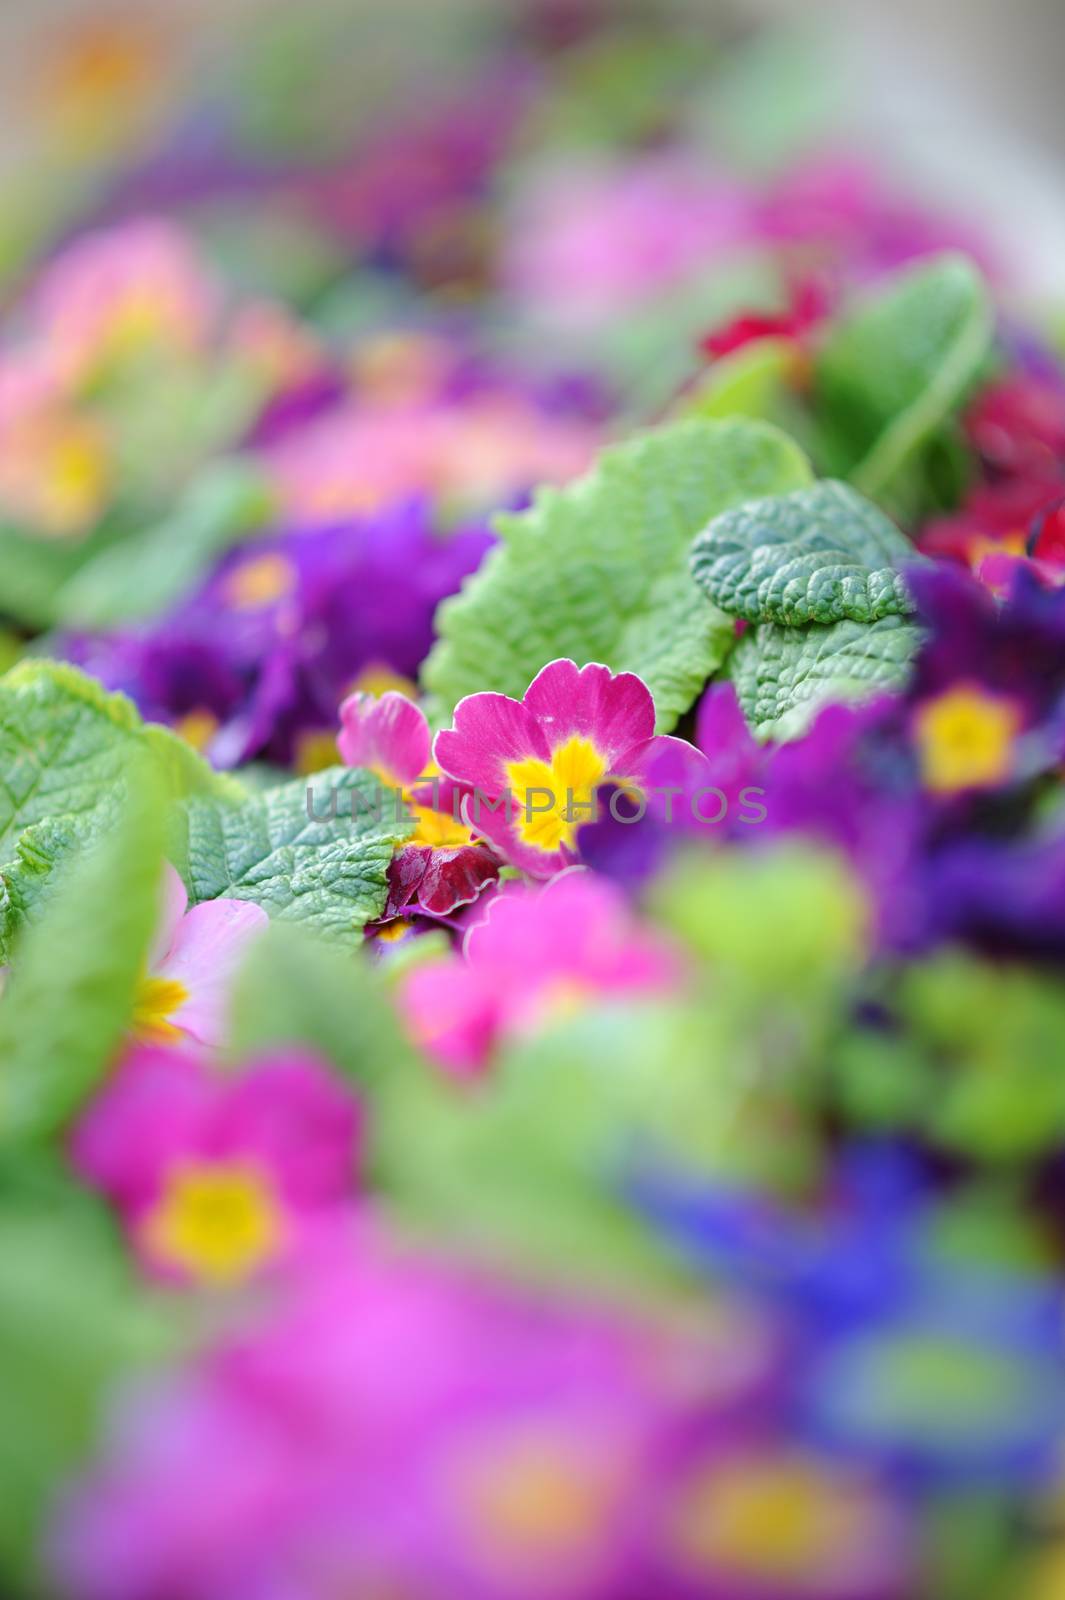 Primula flowers of spring by moviephoto